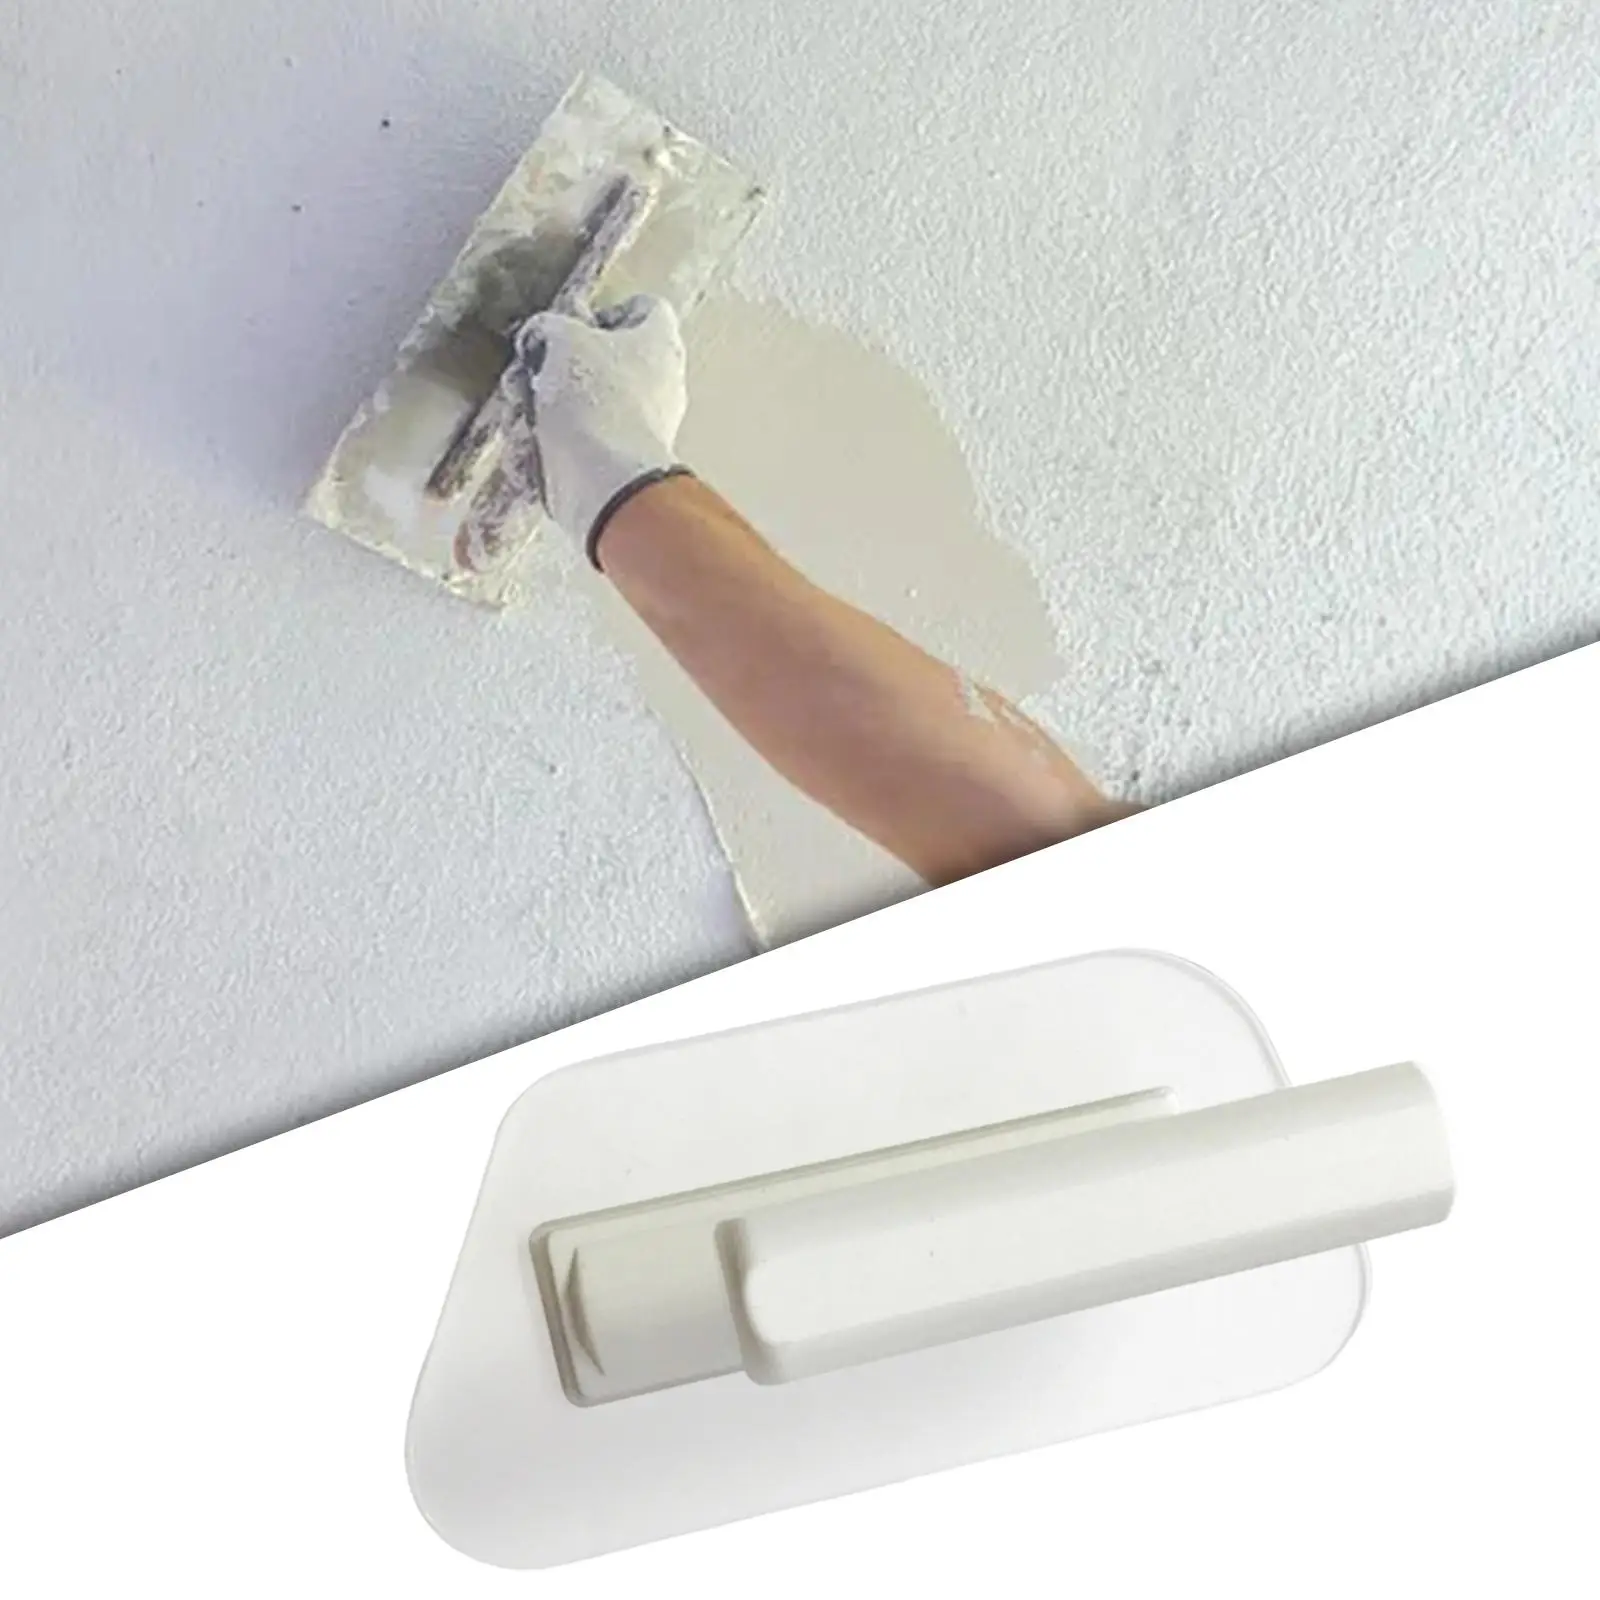 Finisher Plastering Trowel Multifunction Clear Polygon for Cement Wall Decoration Plastering Drywall Filling Removing Wallpaper